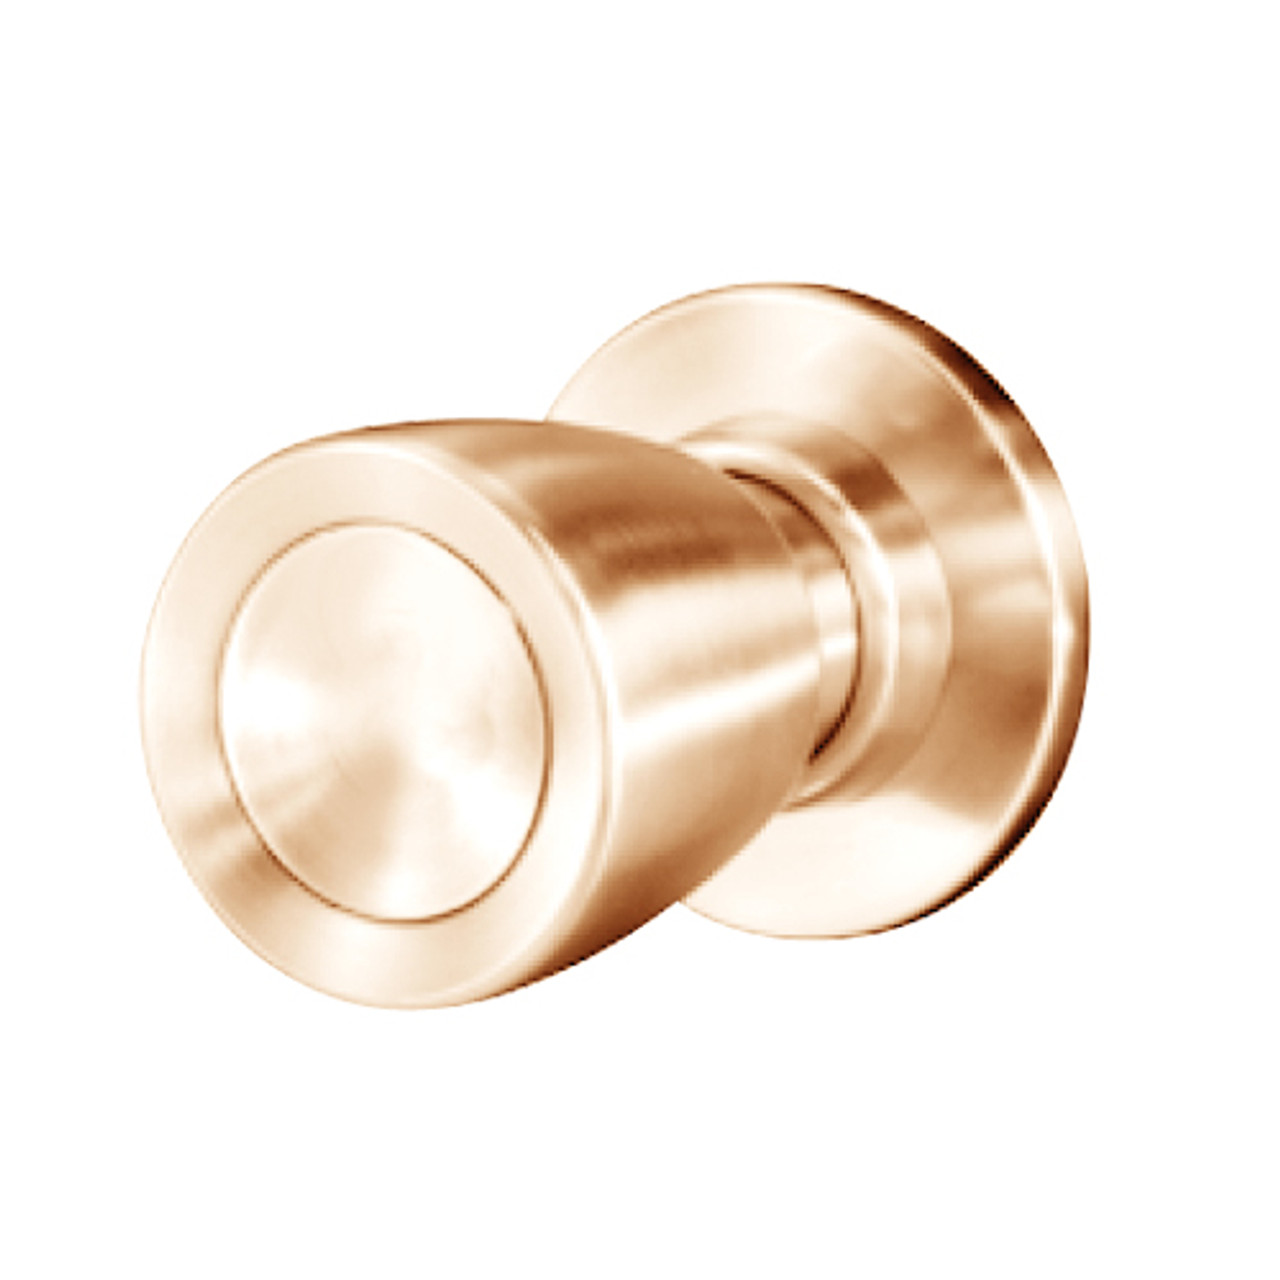 8K30NX6CS3611 Best 8K Series Exit Heavy Duty Cylindrical Knob Locks with Tulip Style in Bright Bronze